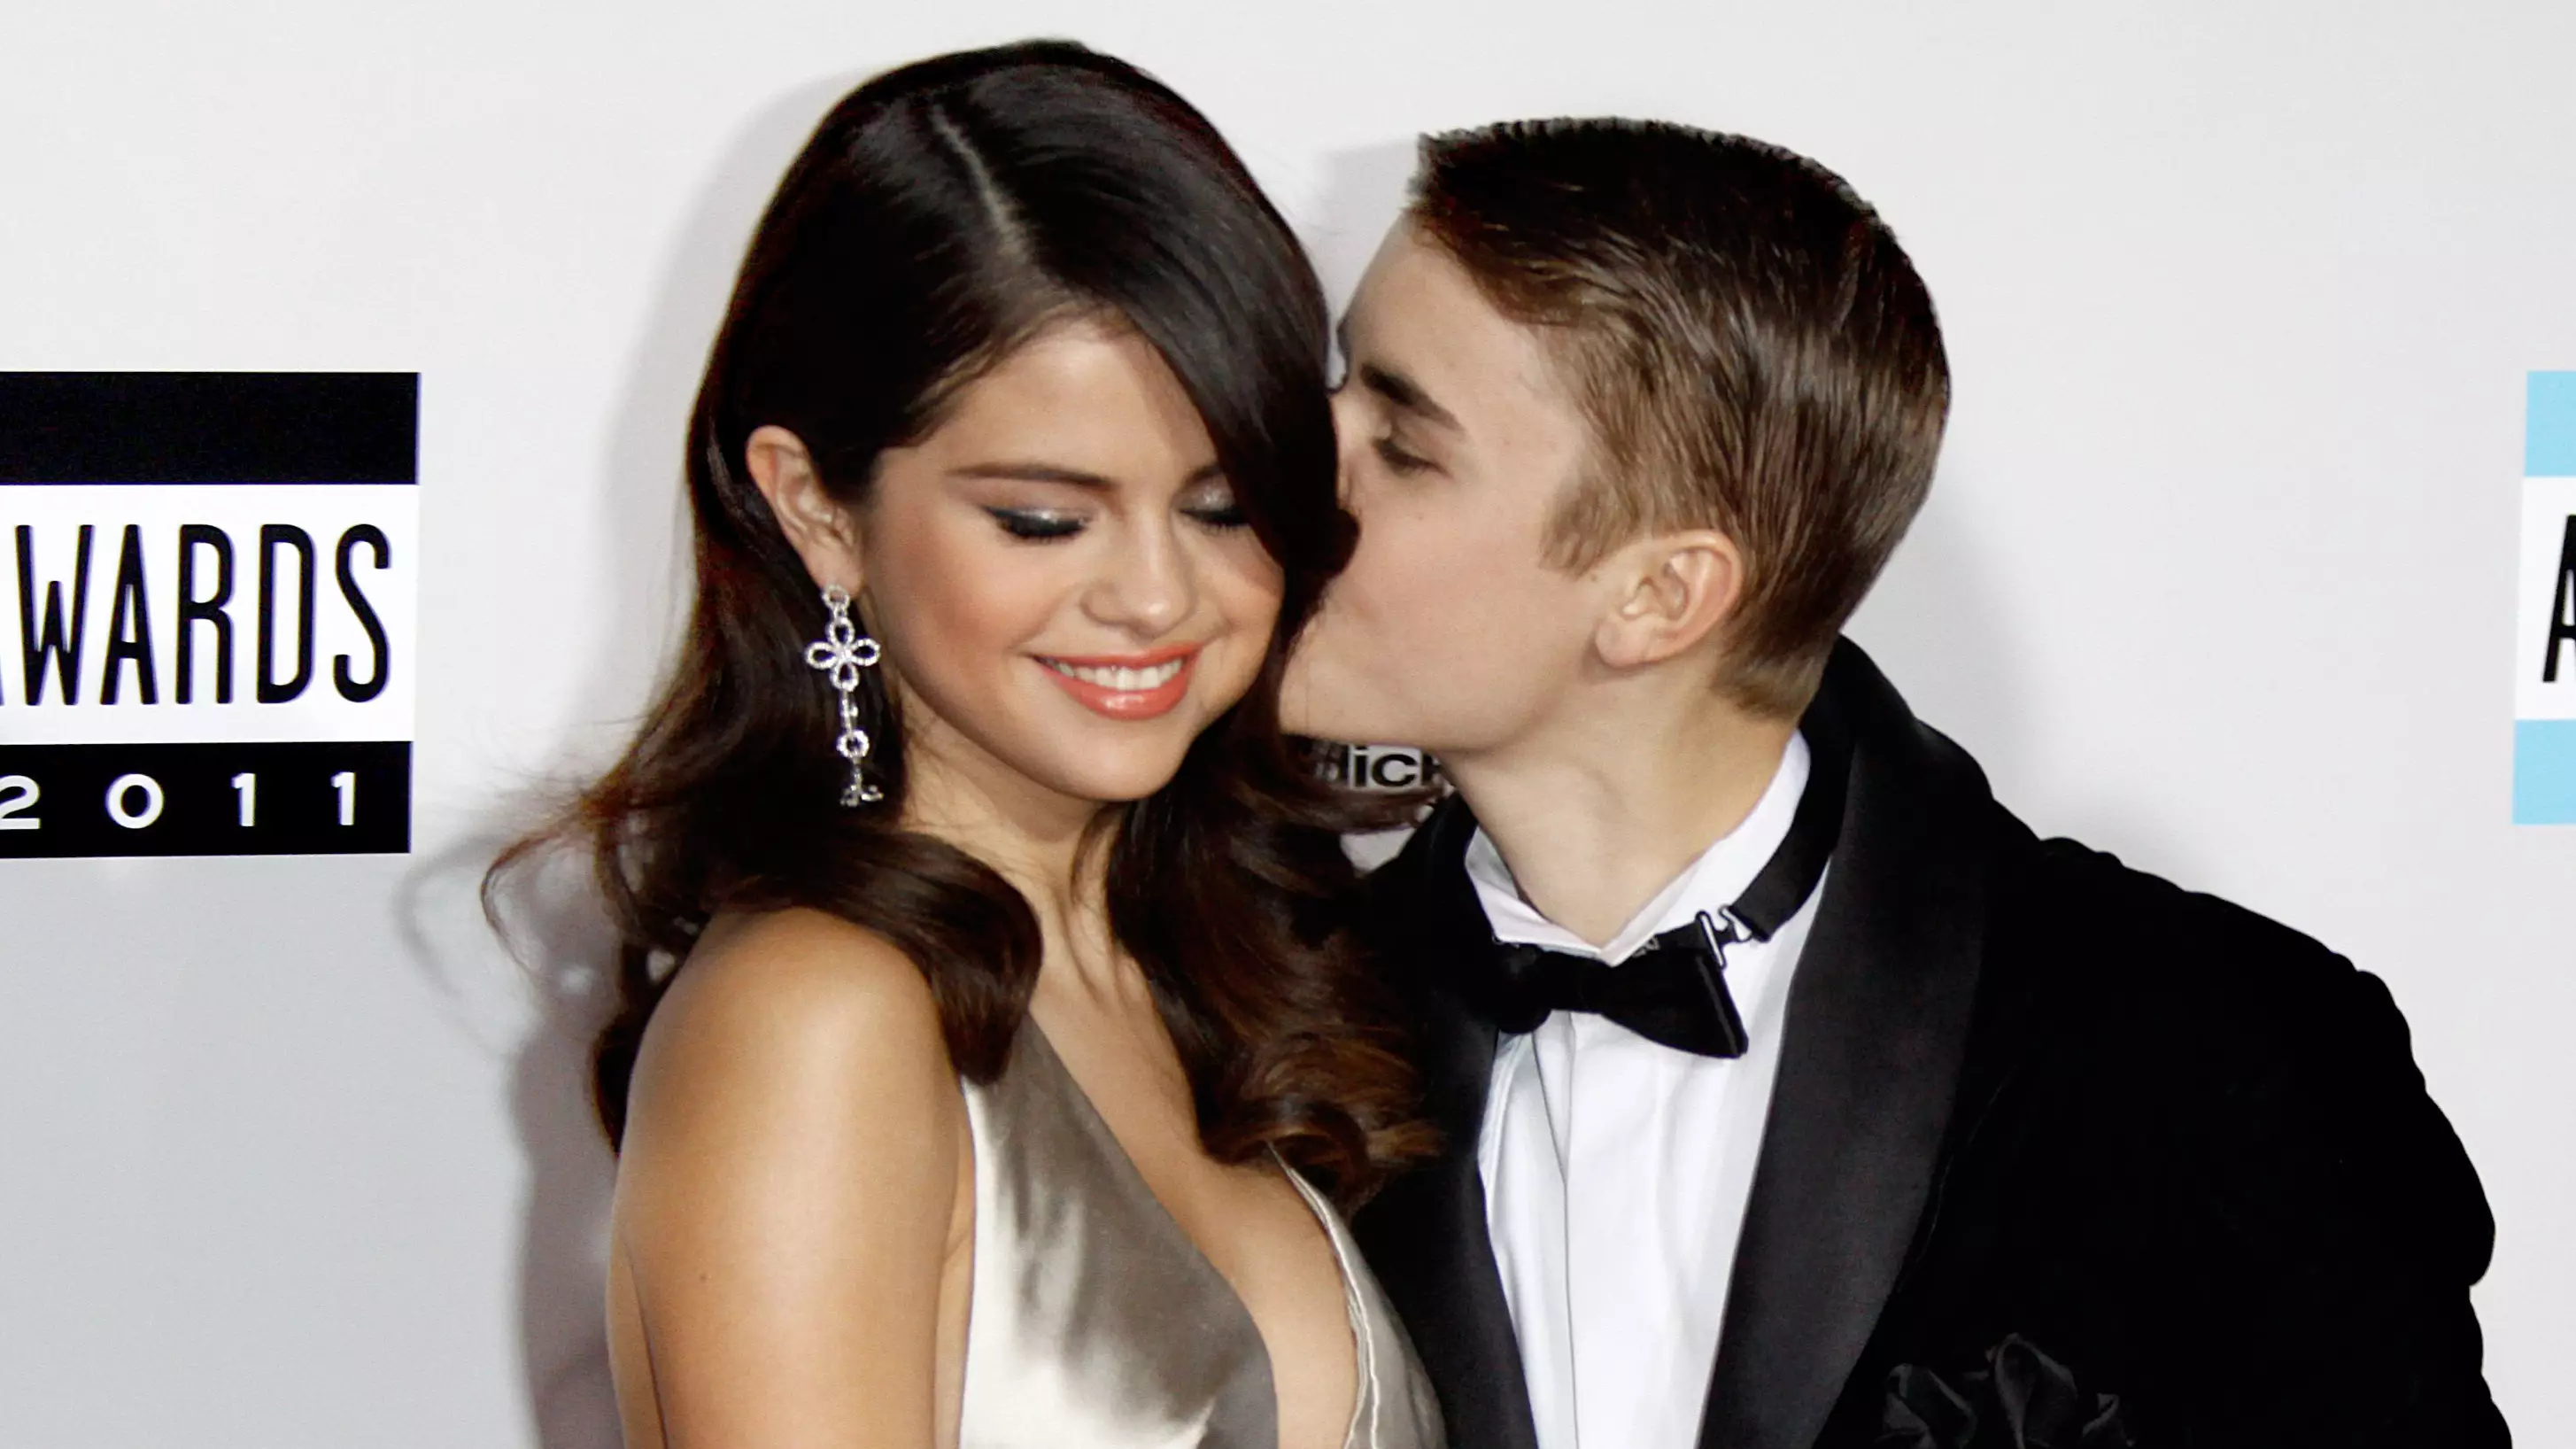 Selena Gomez Accuses Justin Bieber Of Emotional Abuse In New Interview